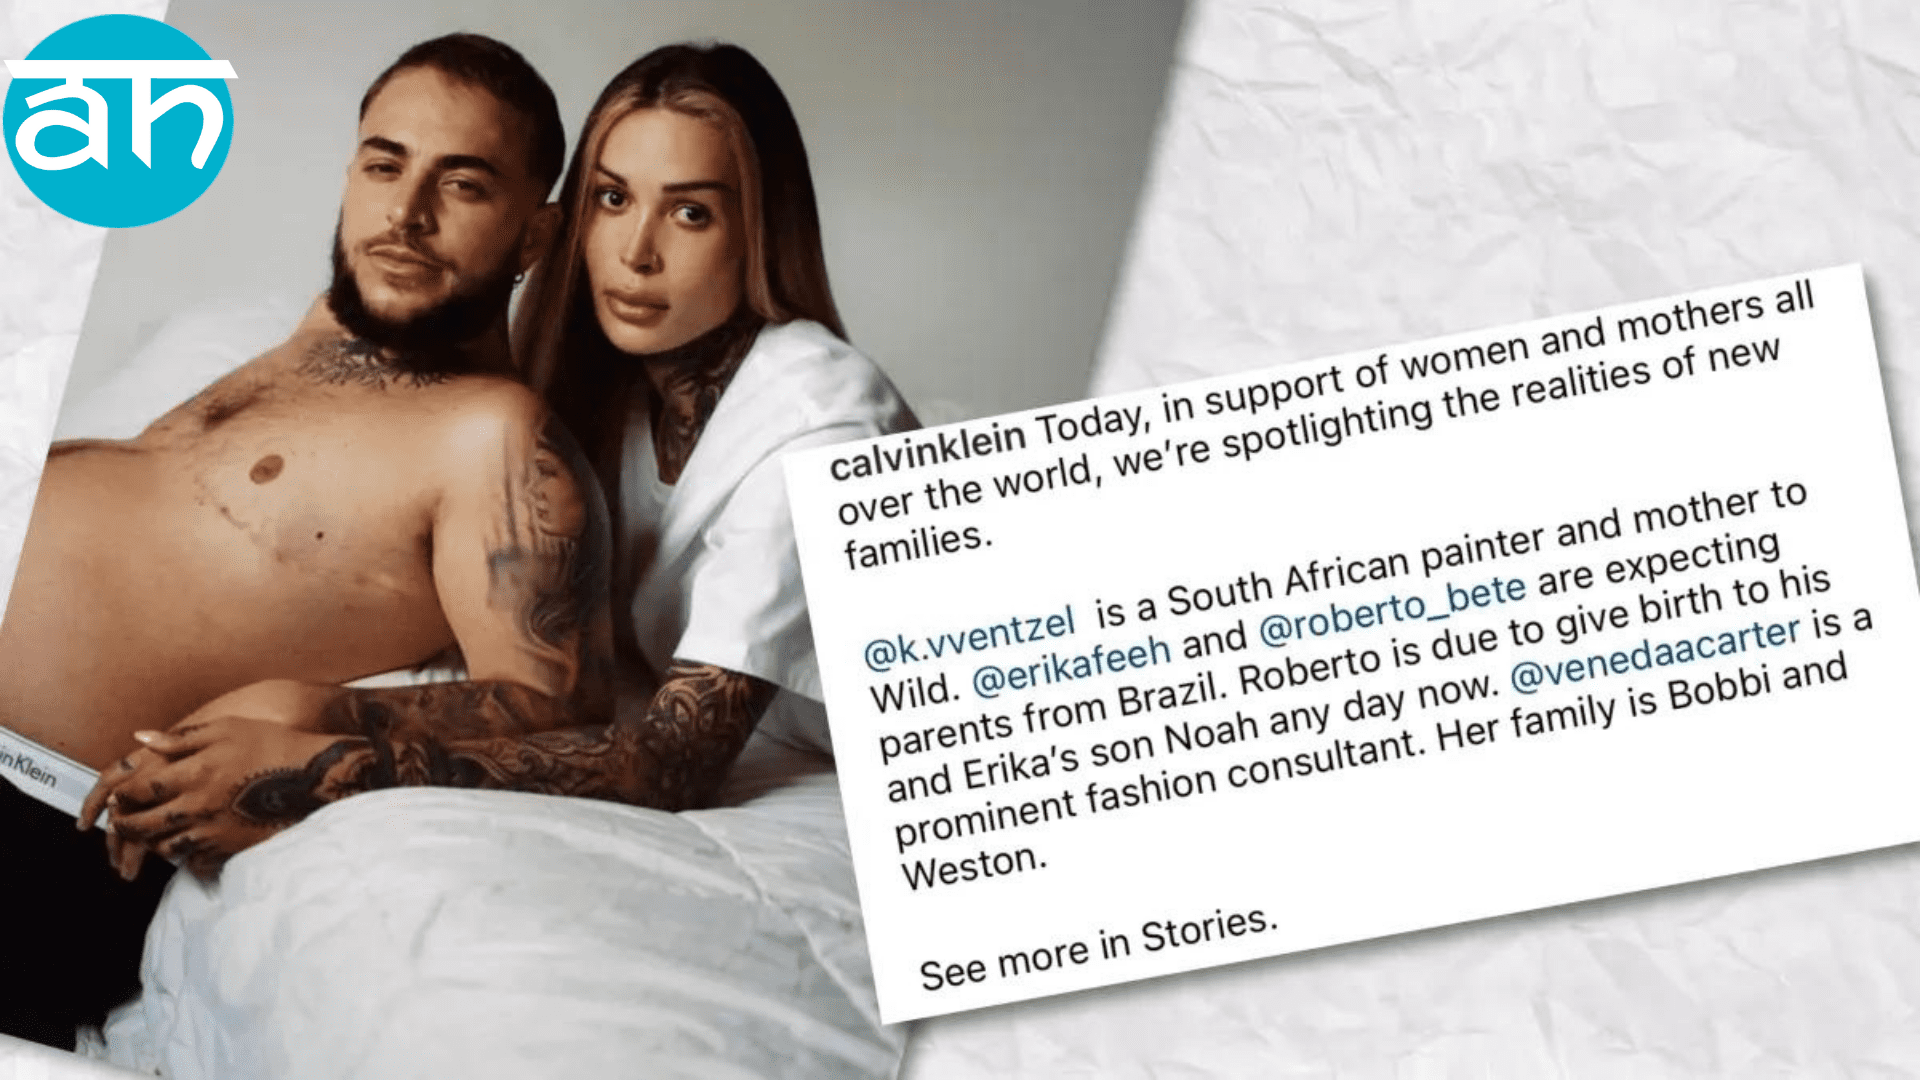 ”pregnant-man-in-calvin-klein-ad-sparks-international-controversy”